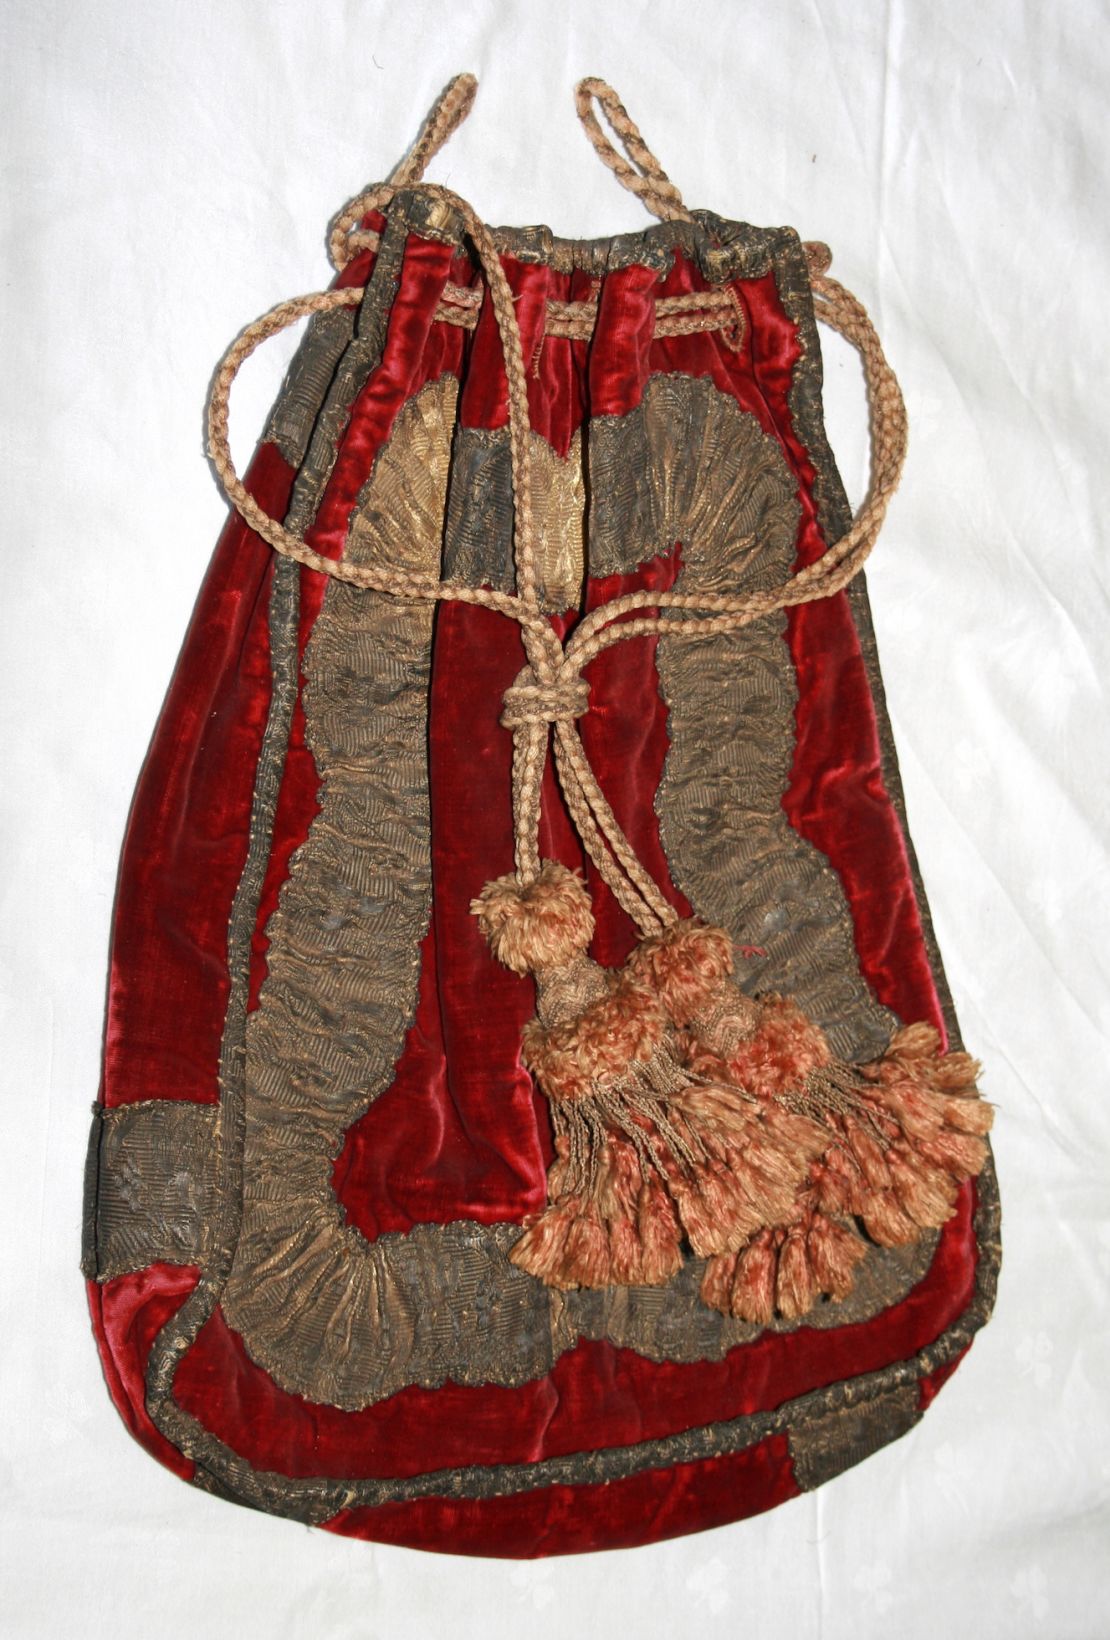 A red velvet bag was discovered in the attic of West Horsley Place, the former home of Sir Walter Raleigh's wife and son.